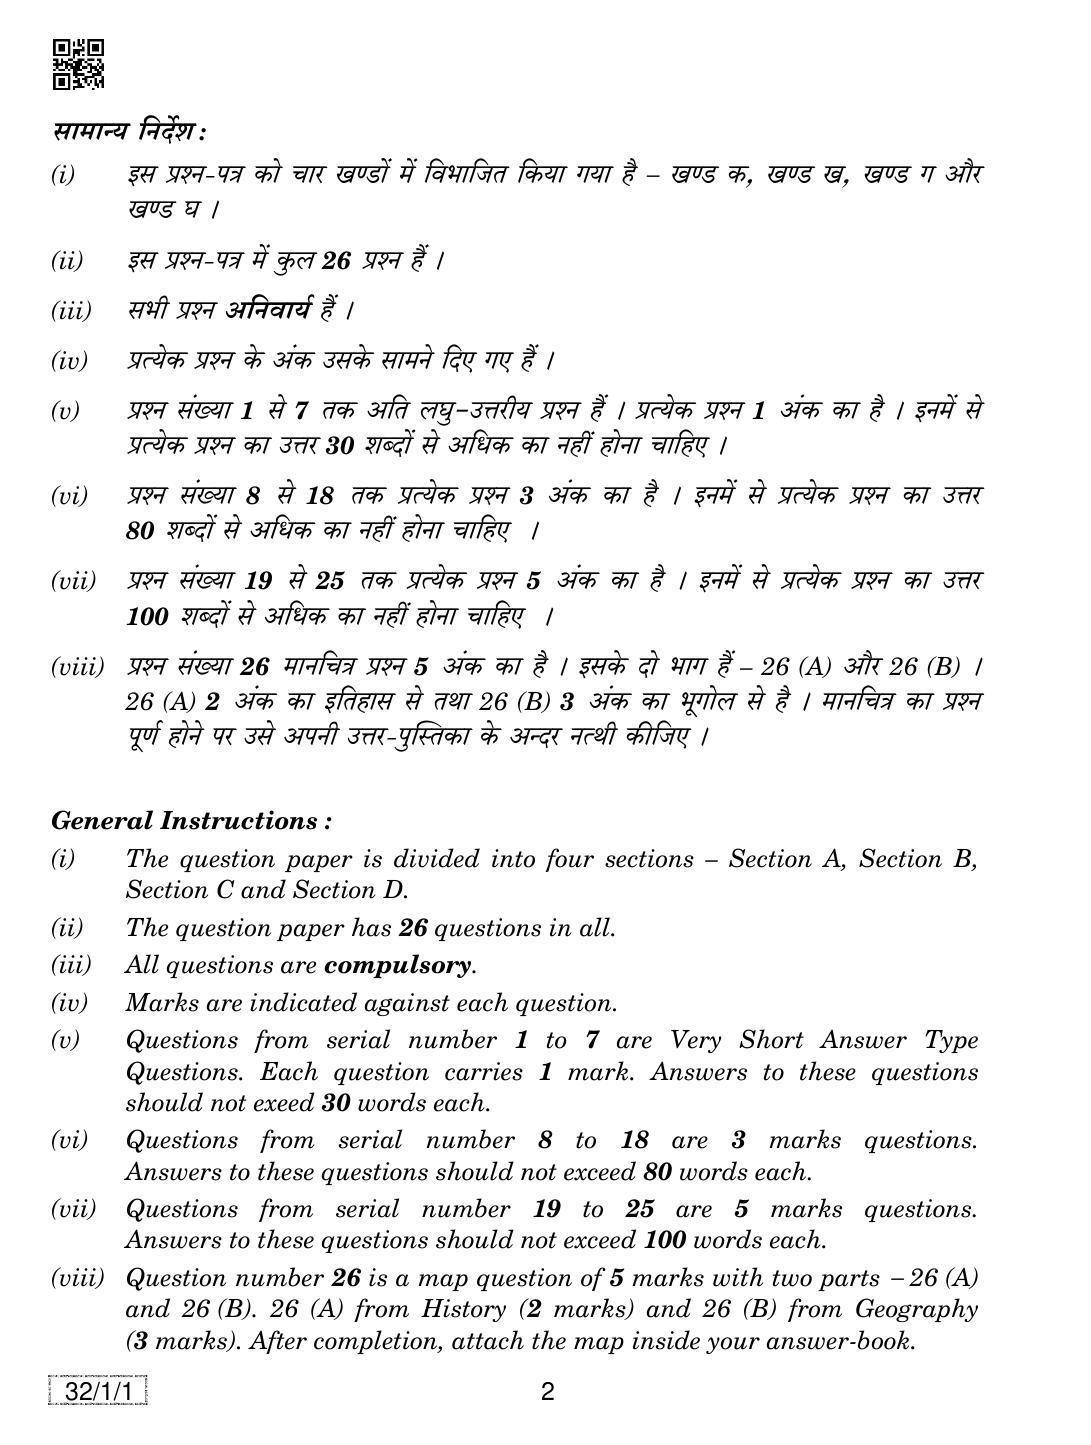 CBSE Class 10 32-1-1 SOCIAL SCIENCE 2019 Compartment Question Paper - Page 2